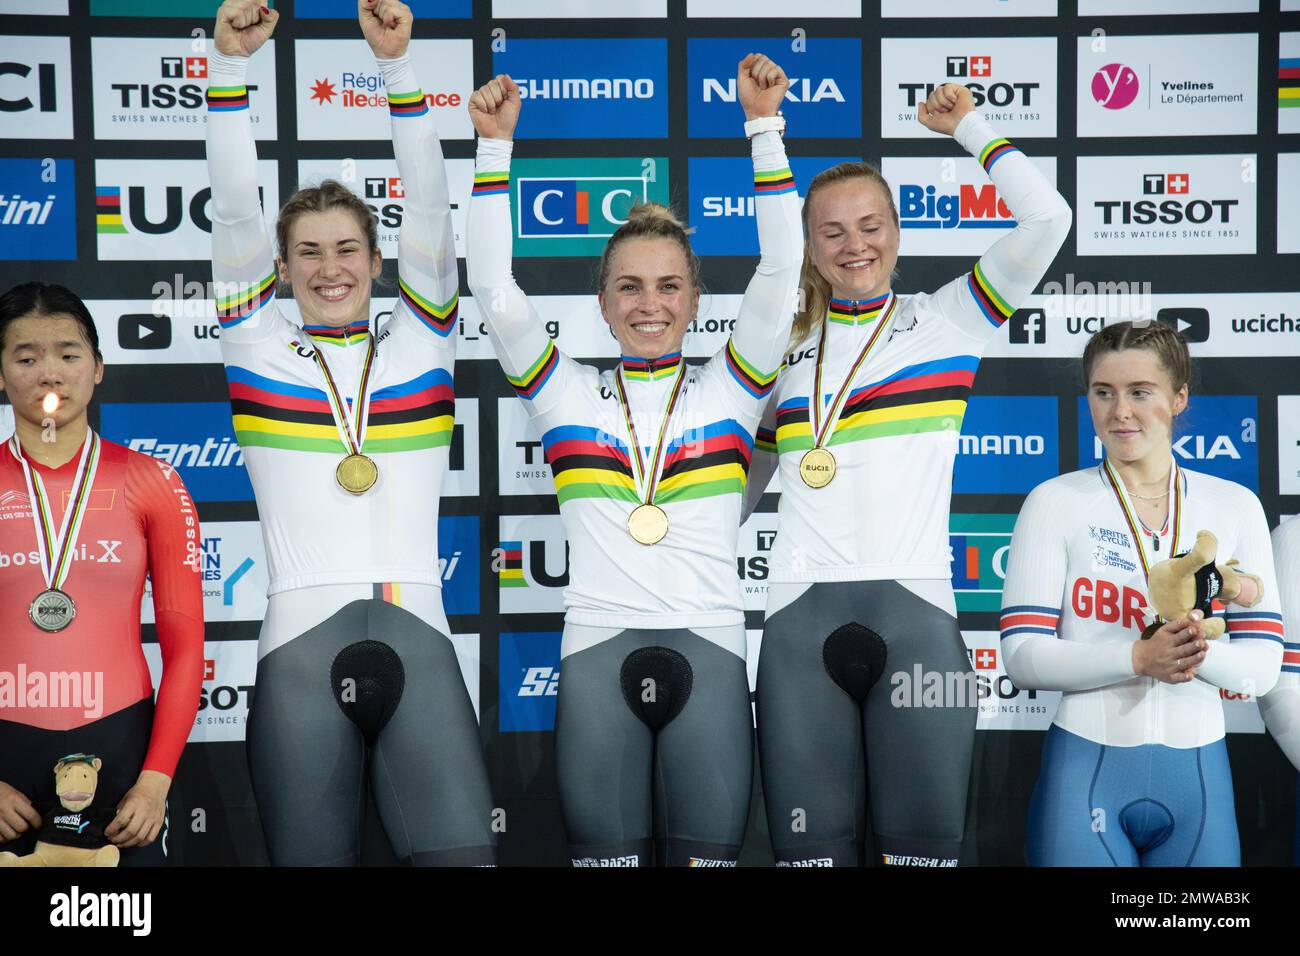 The German women's team sprint world champions on the podium with their gold medals. Pauline Grabosch(L), Emma Hinze, and Lea Sophie Friedrich(R). Stock Photo